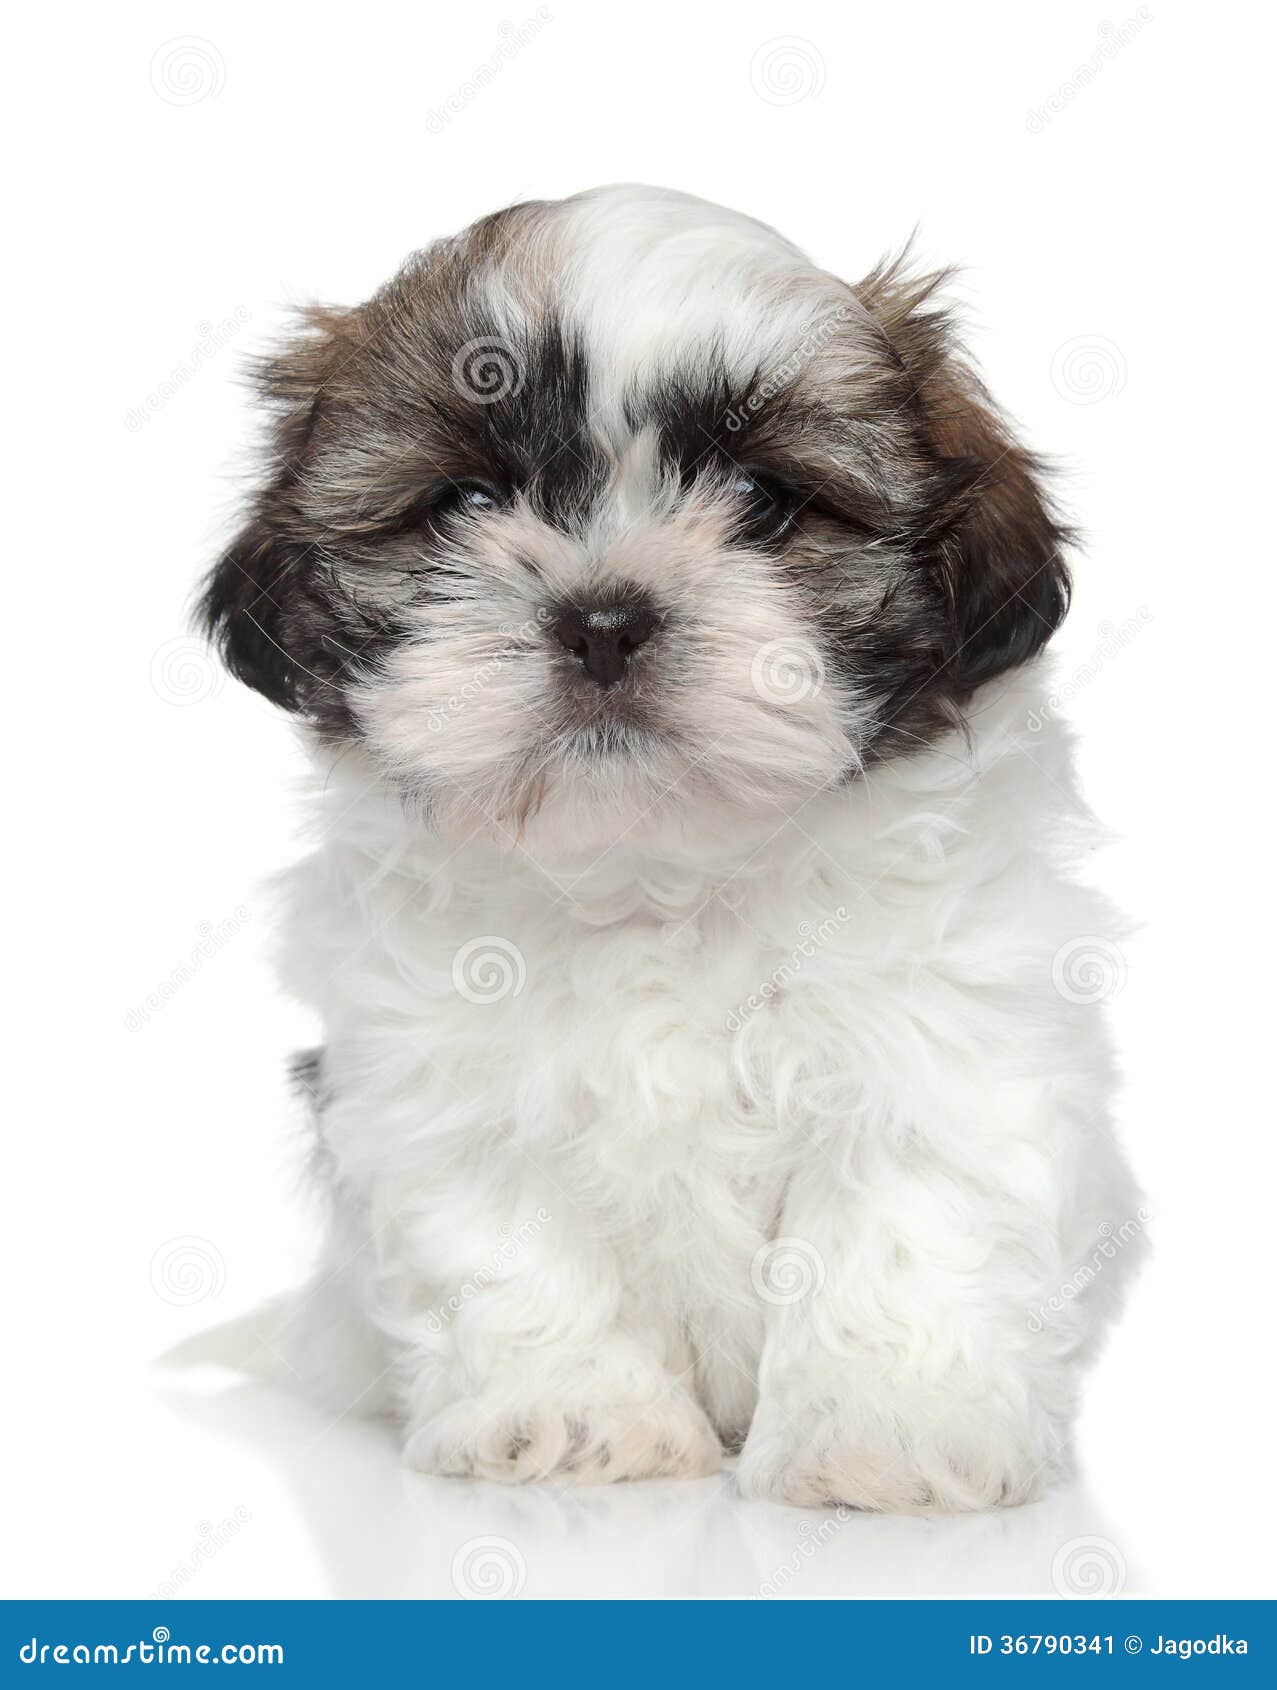 Puppy On A White Background Stock Image Image of animals